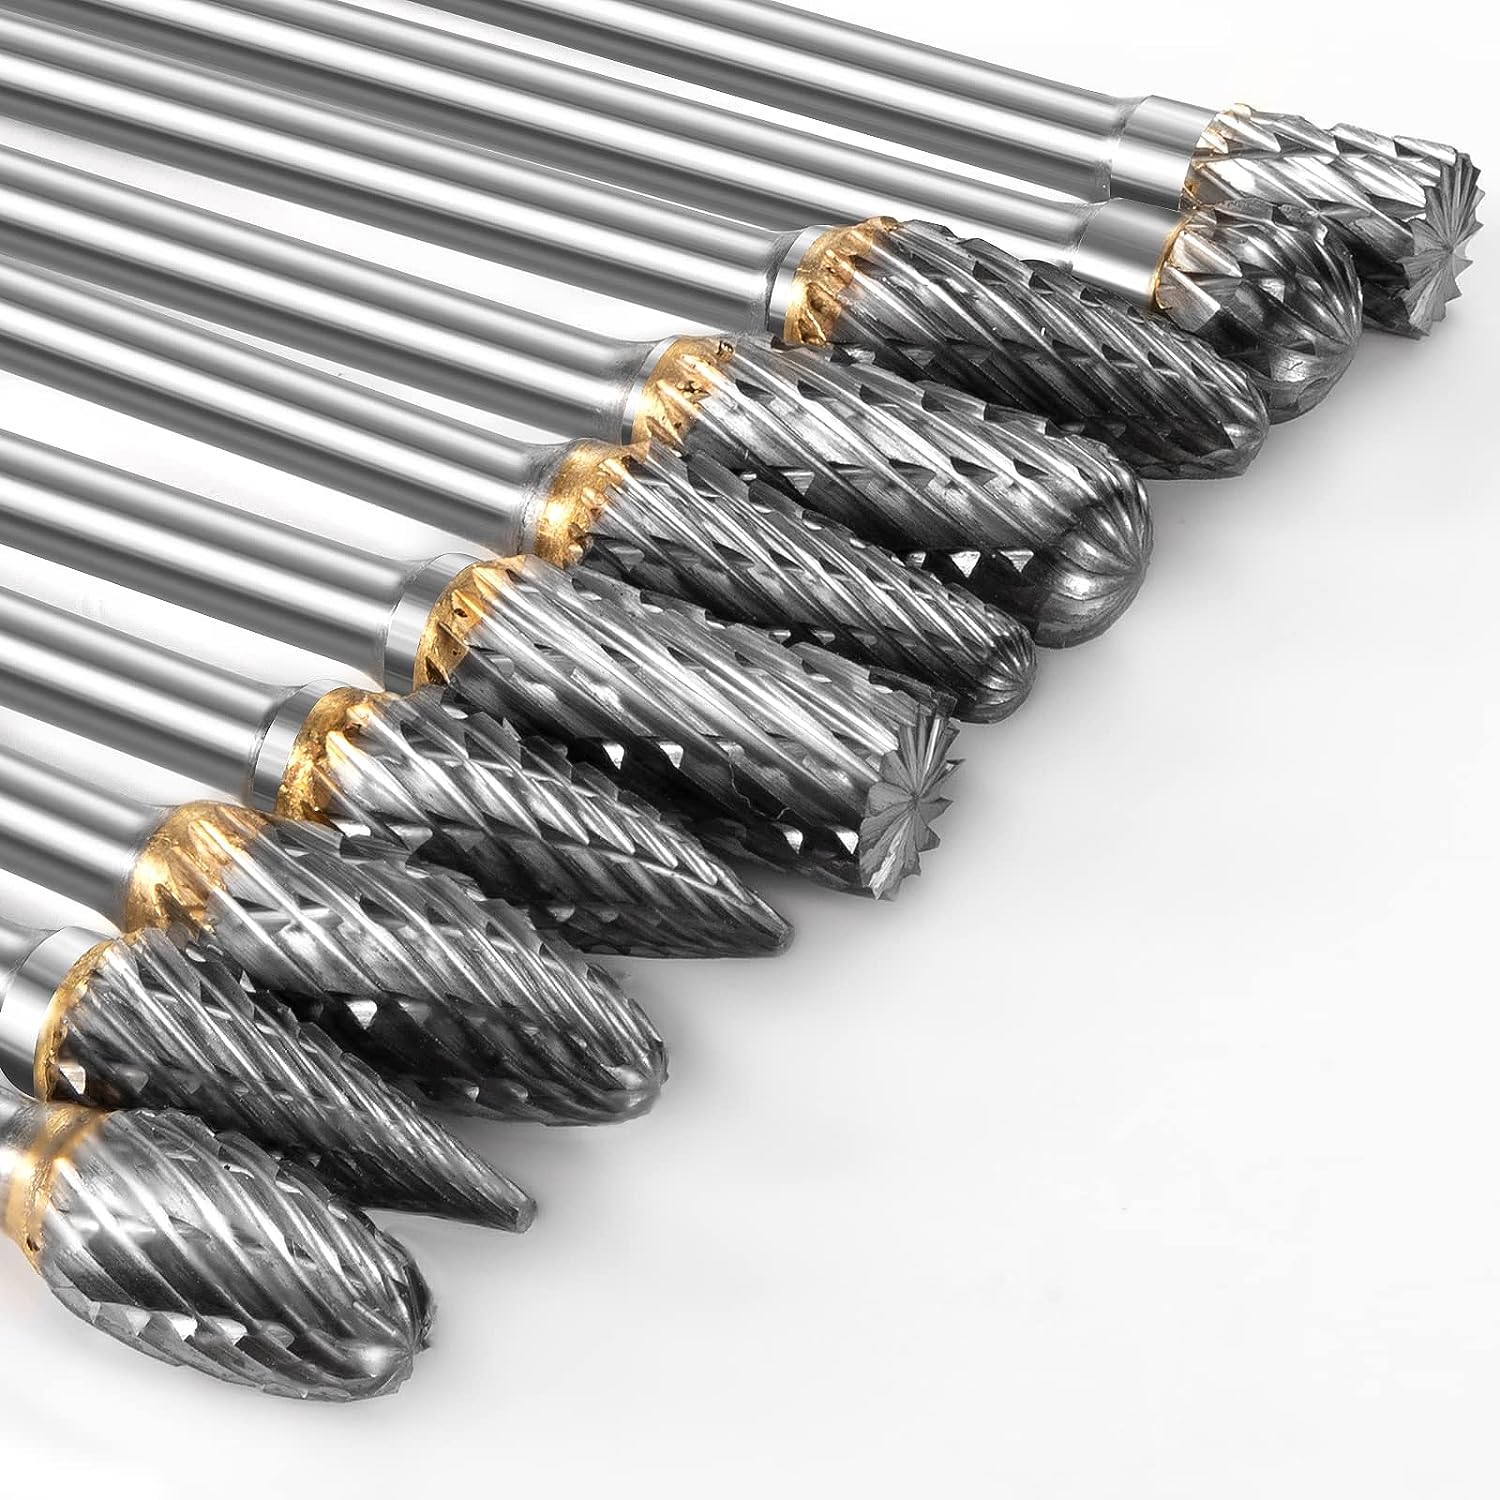 FOTYBEI 10Pcs Tungsten Carbide Rotary Burr Set Compatible with Dremel Rotary Tool Accessories, Die Grinder Bits with 1/8 Shank for DIY Woodworking, Carving, Metal Polishing, Engraving, Drilling